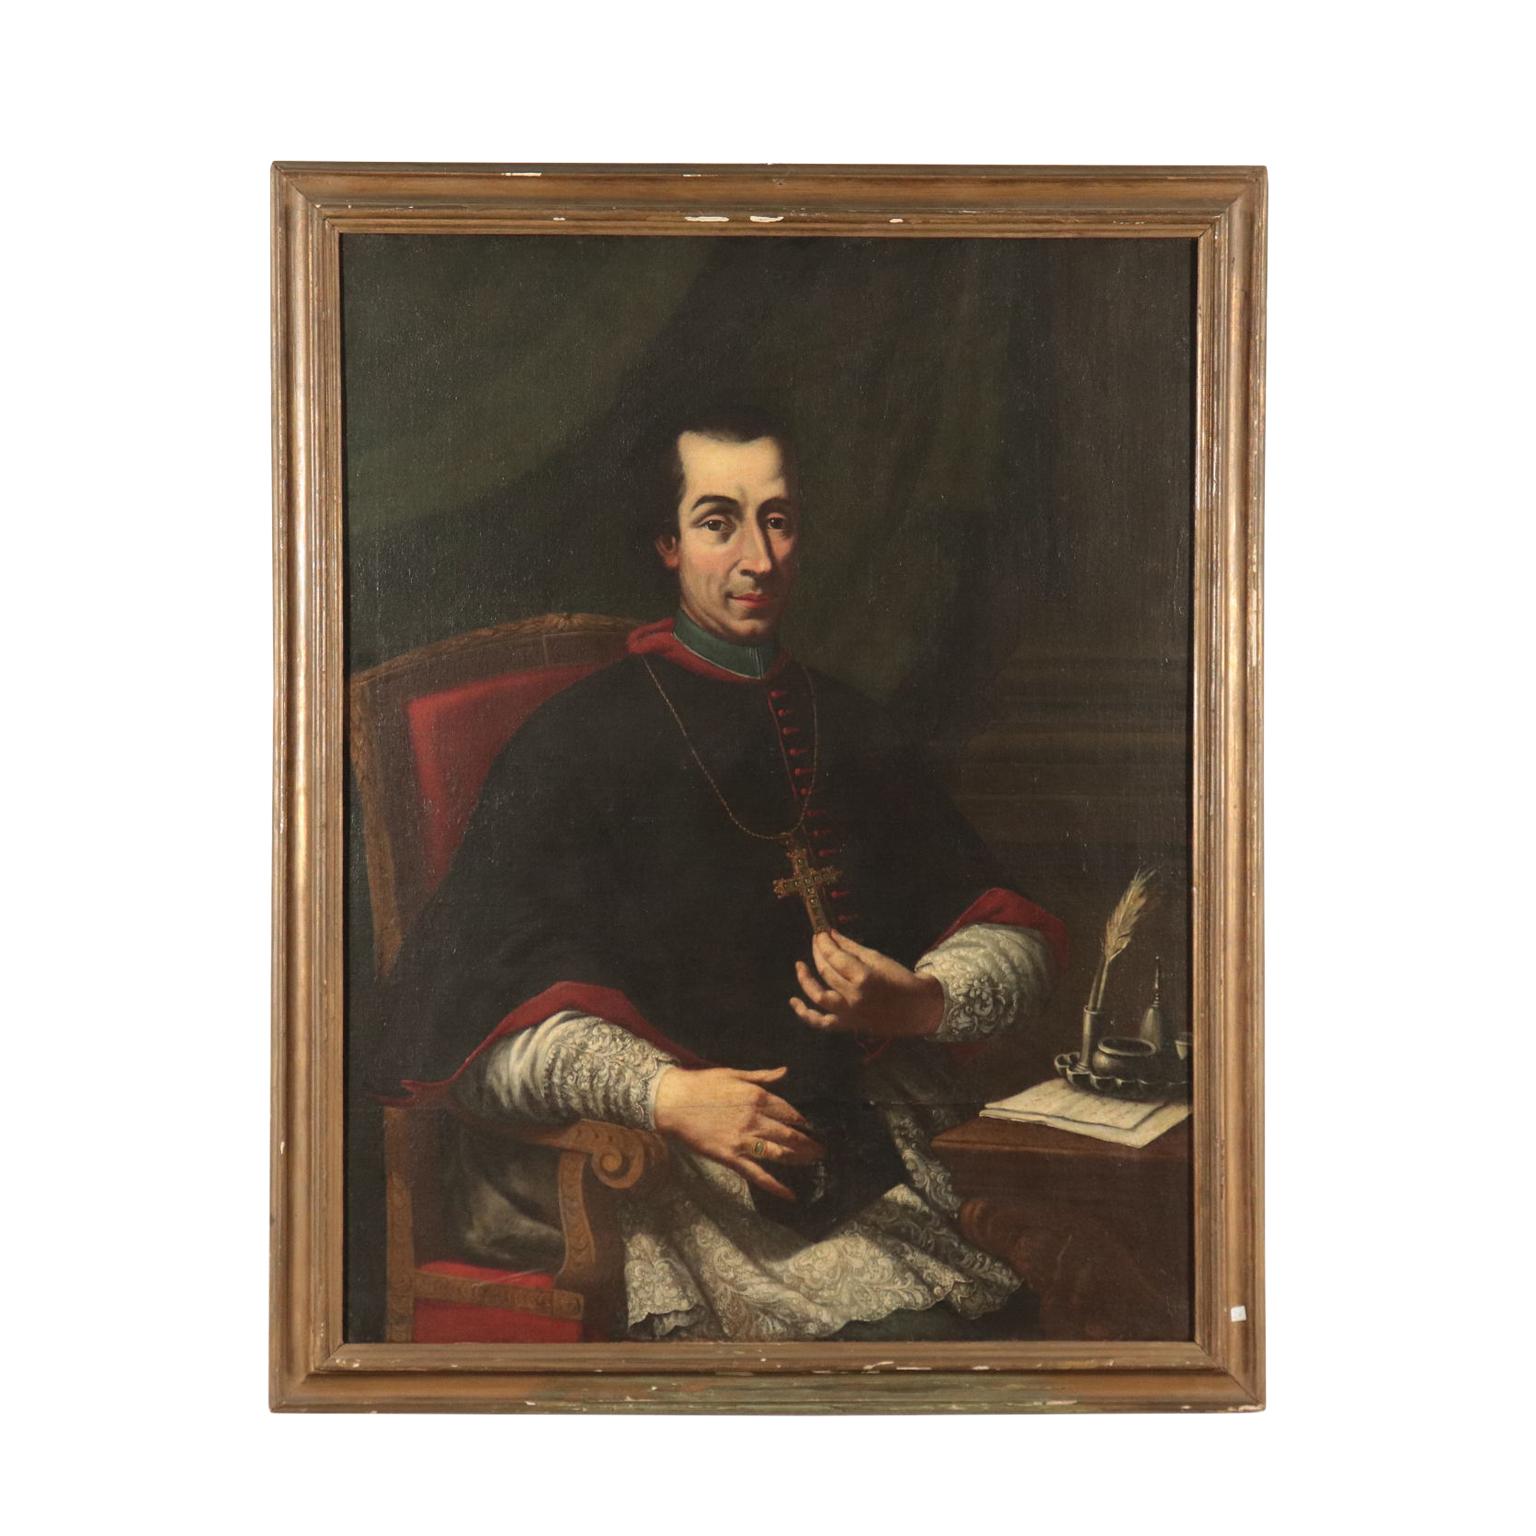 Unknown Portrait Painting - Portrait of a Prelate, Oil on Canvas, 18th Century